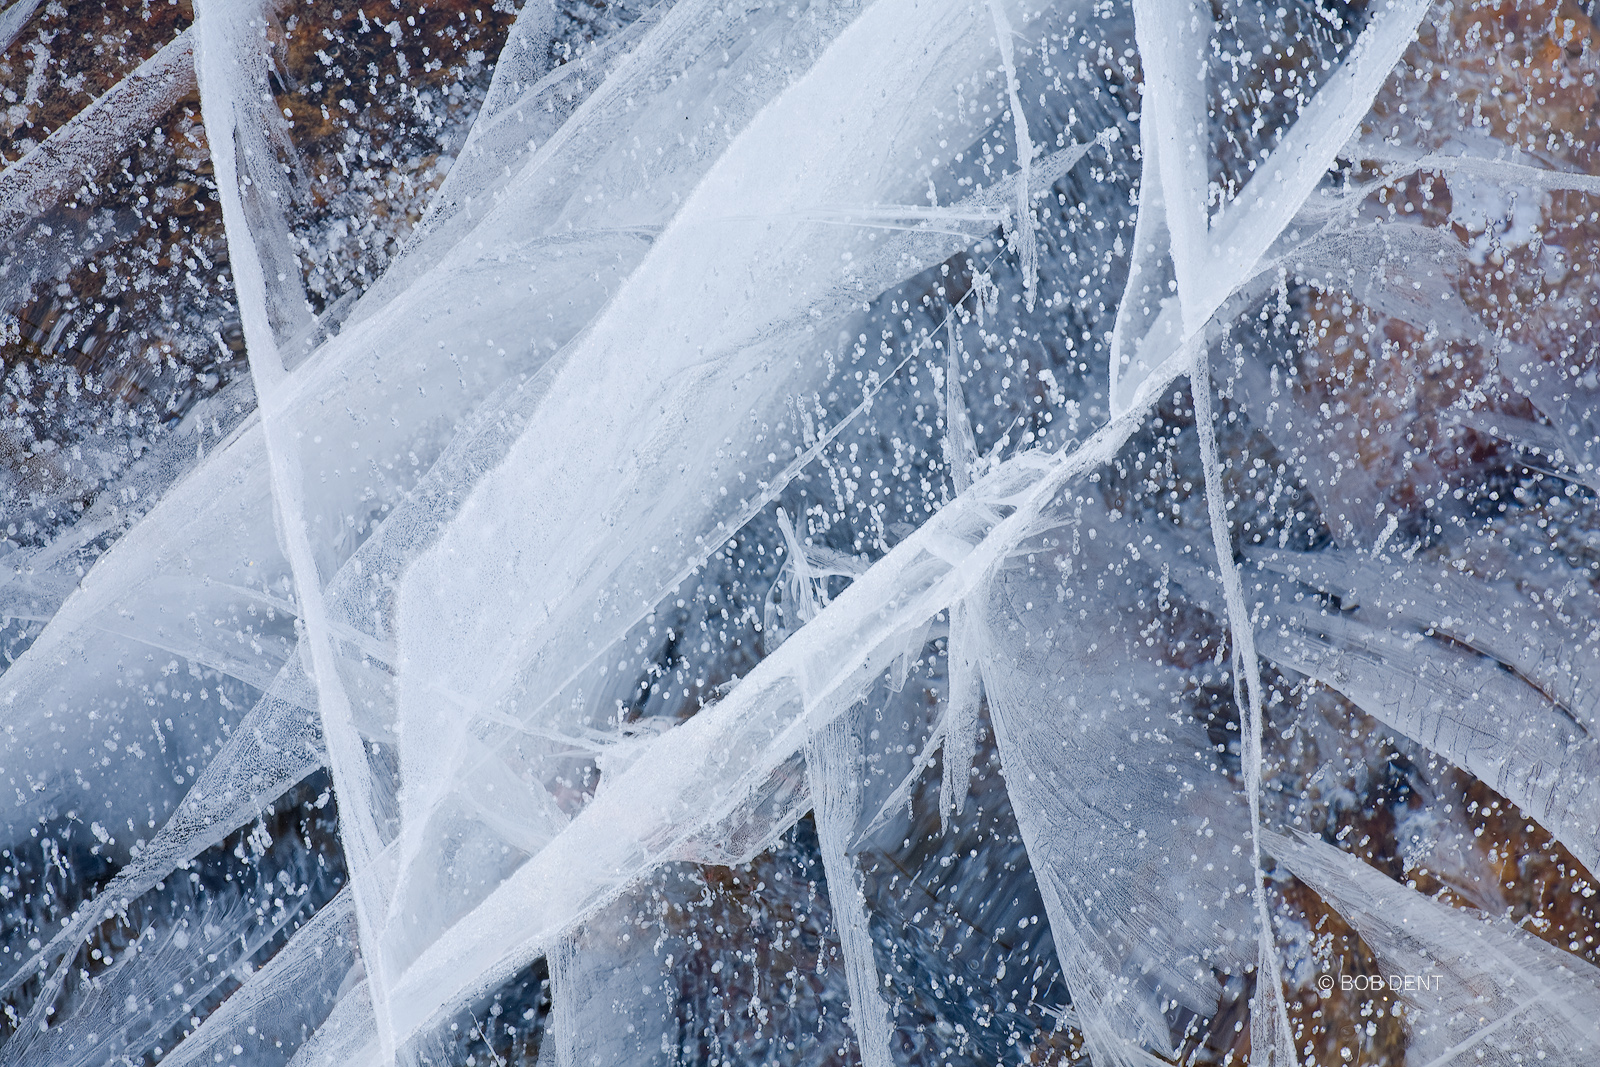 Detail of ice fracture at Dream Lake, Rocky Mountain National Park, Colorado.